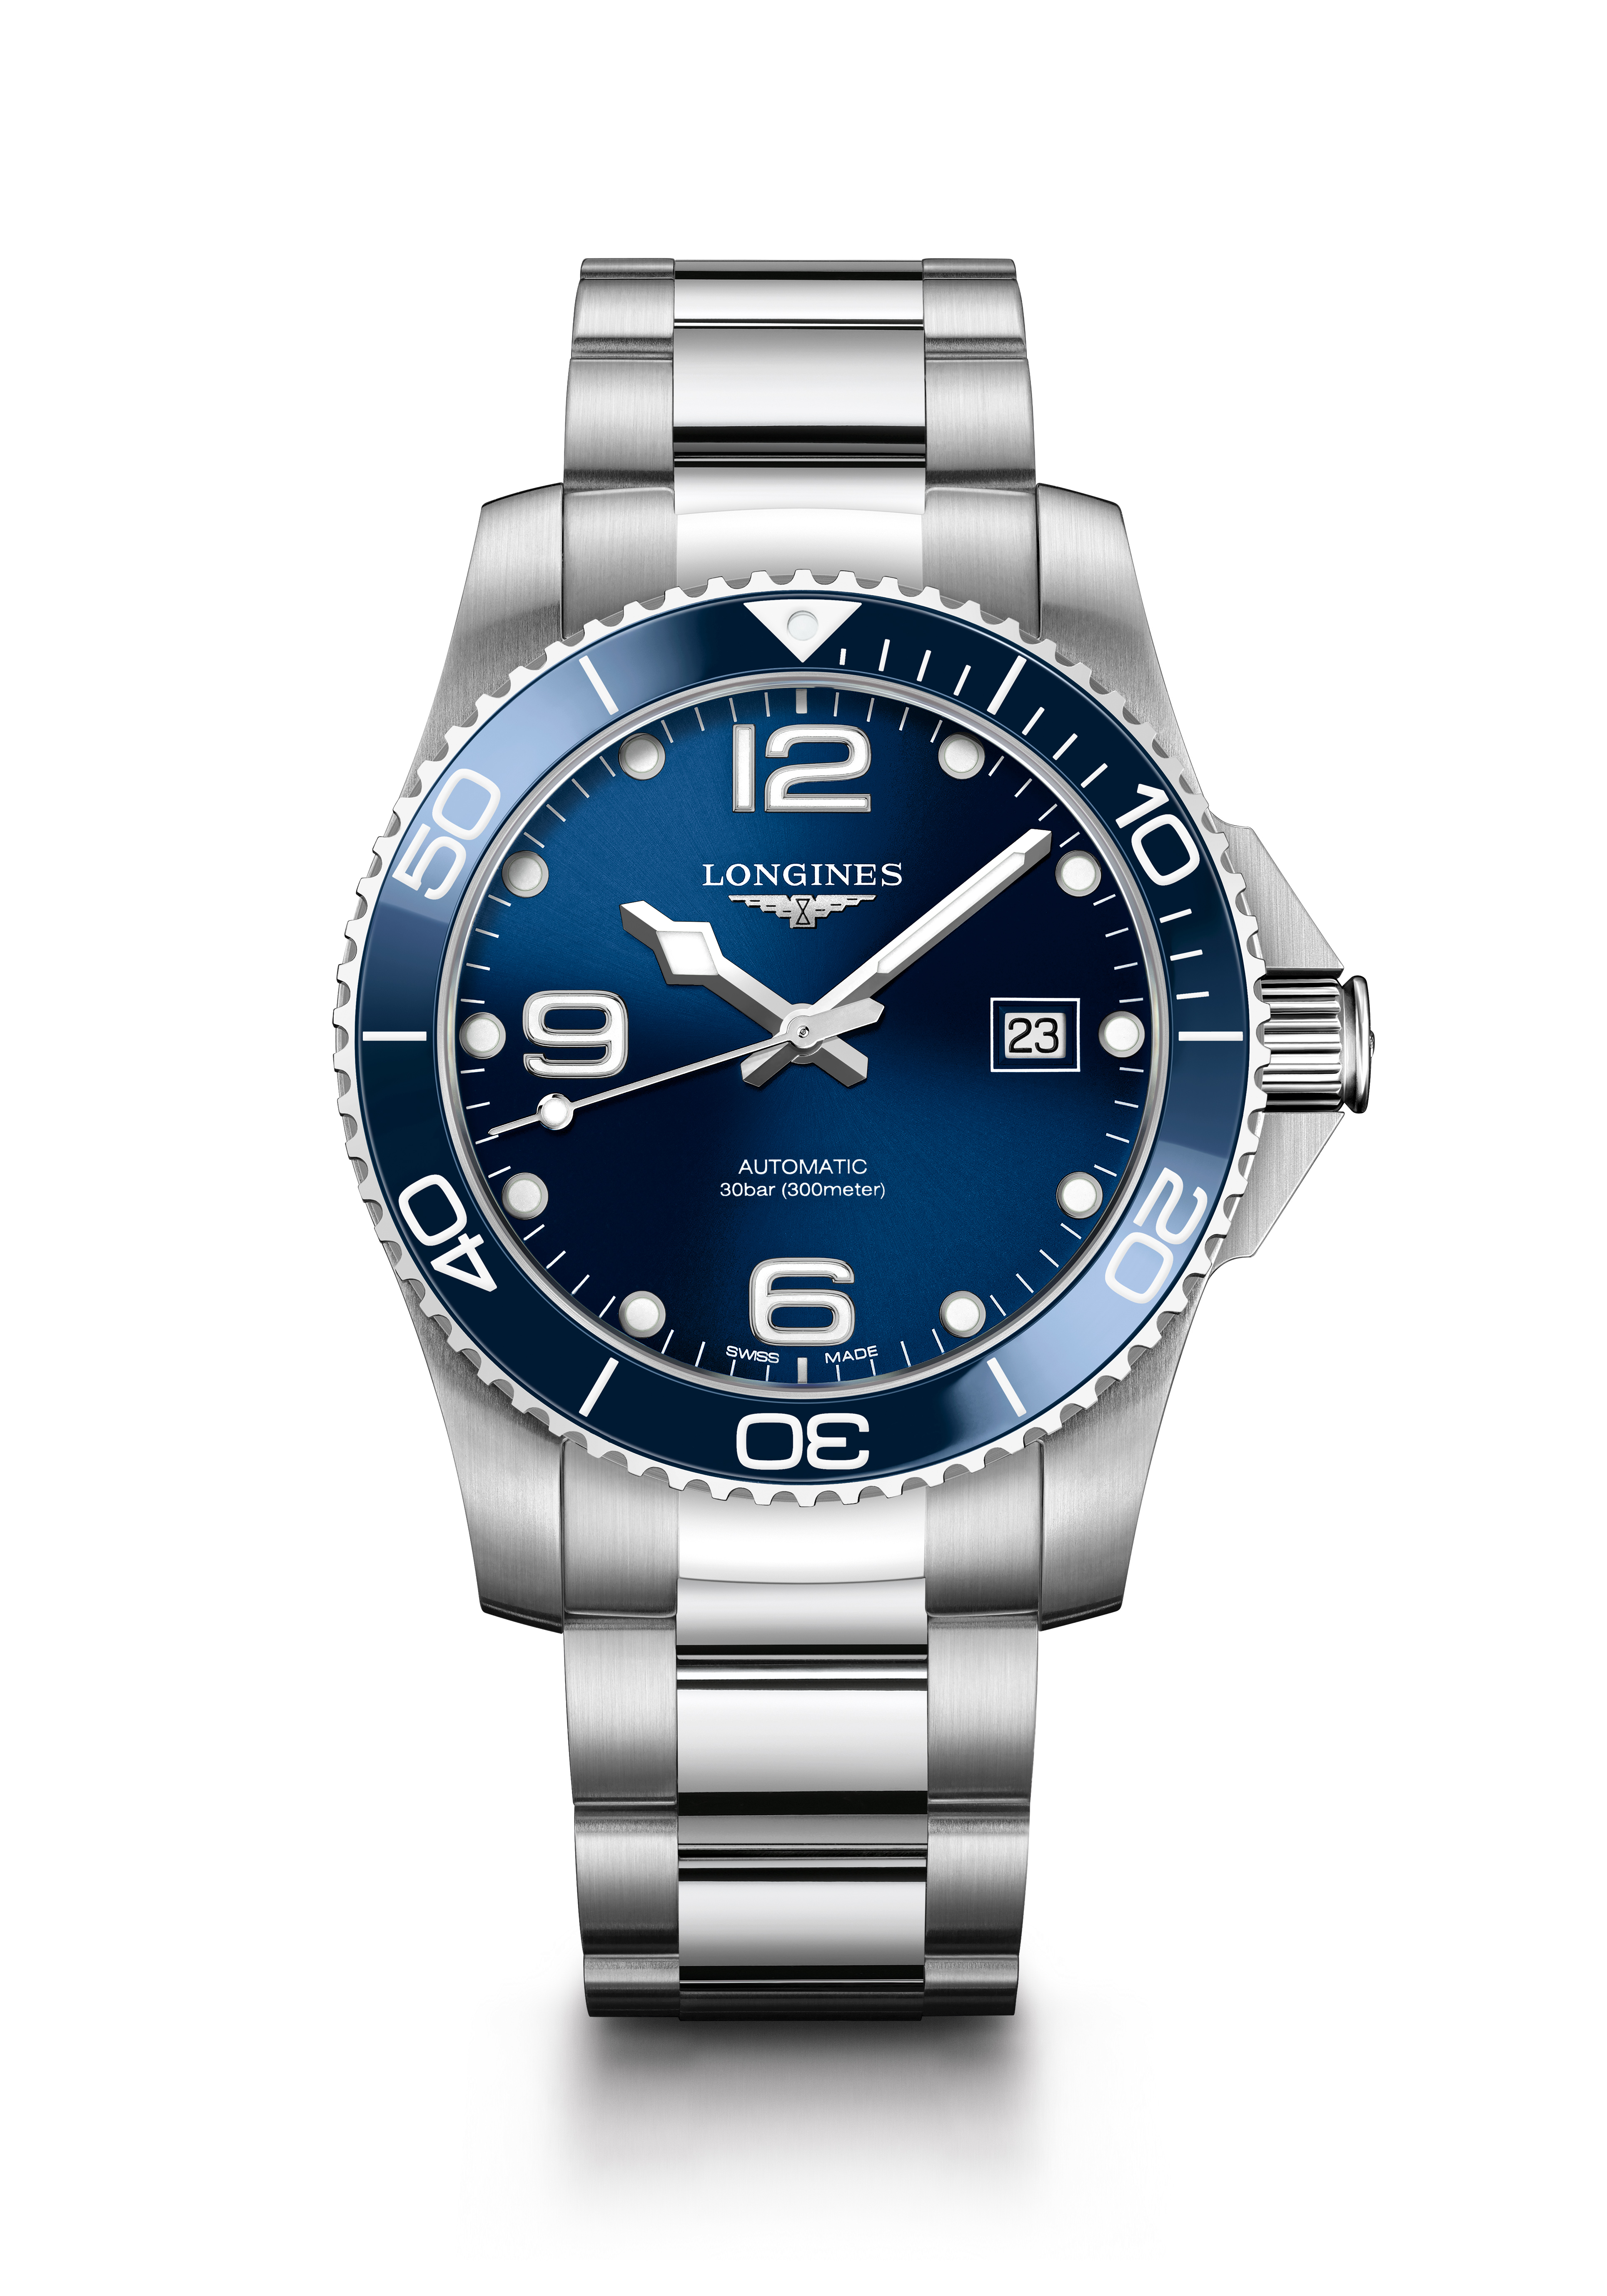 Baselworld 2018: Longines HydroConquest Dive Watch With Ceramic Bezel